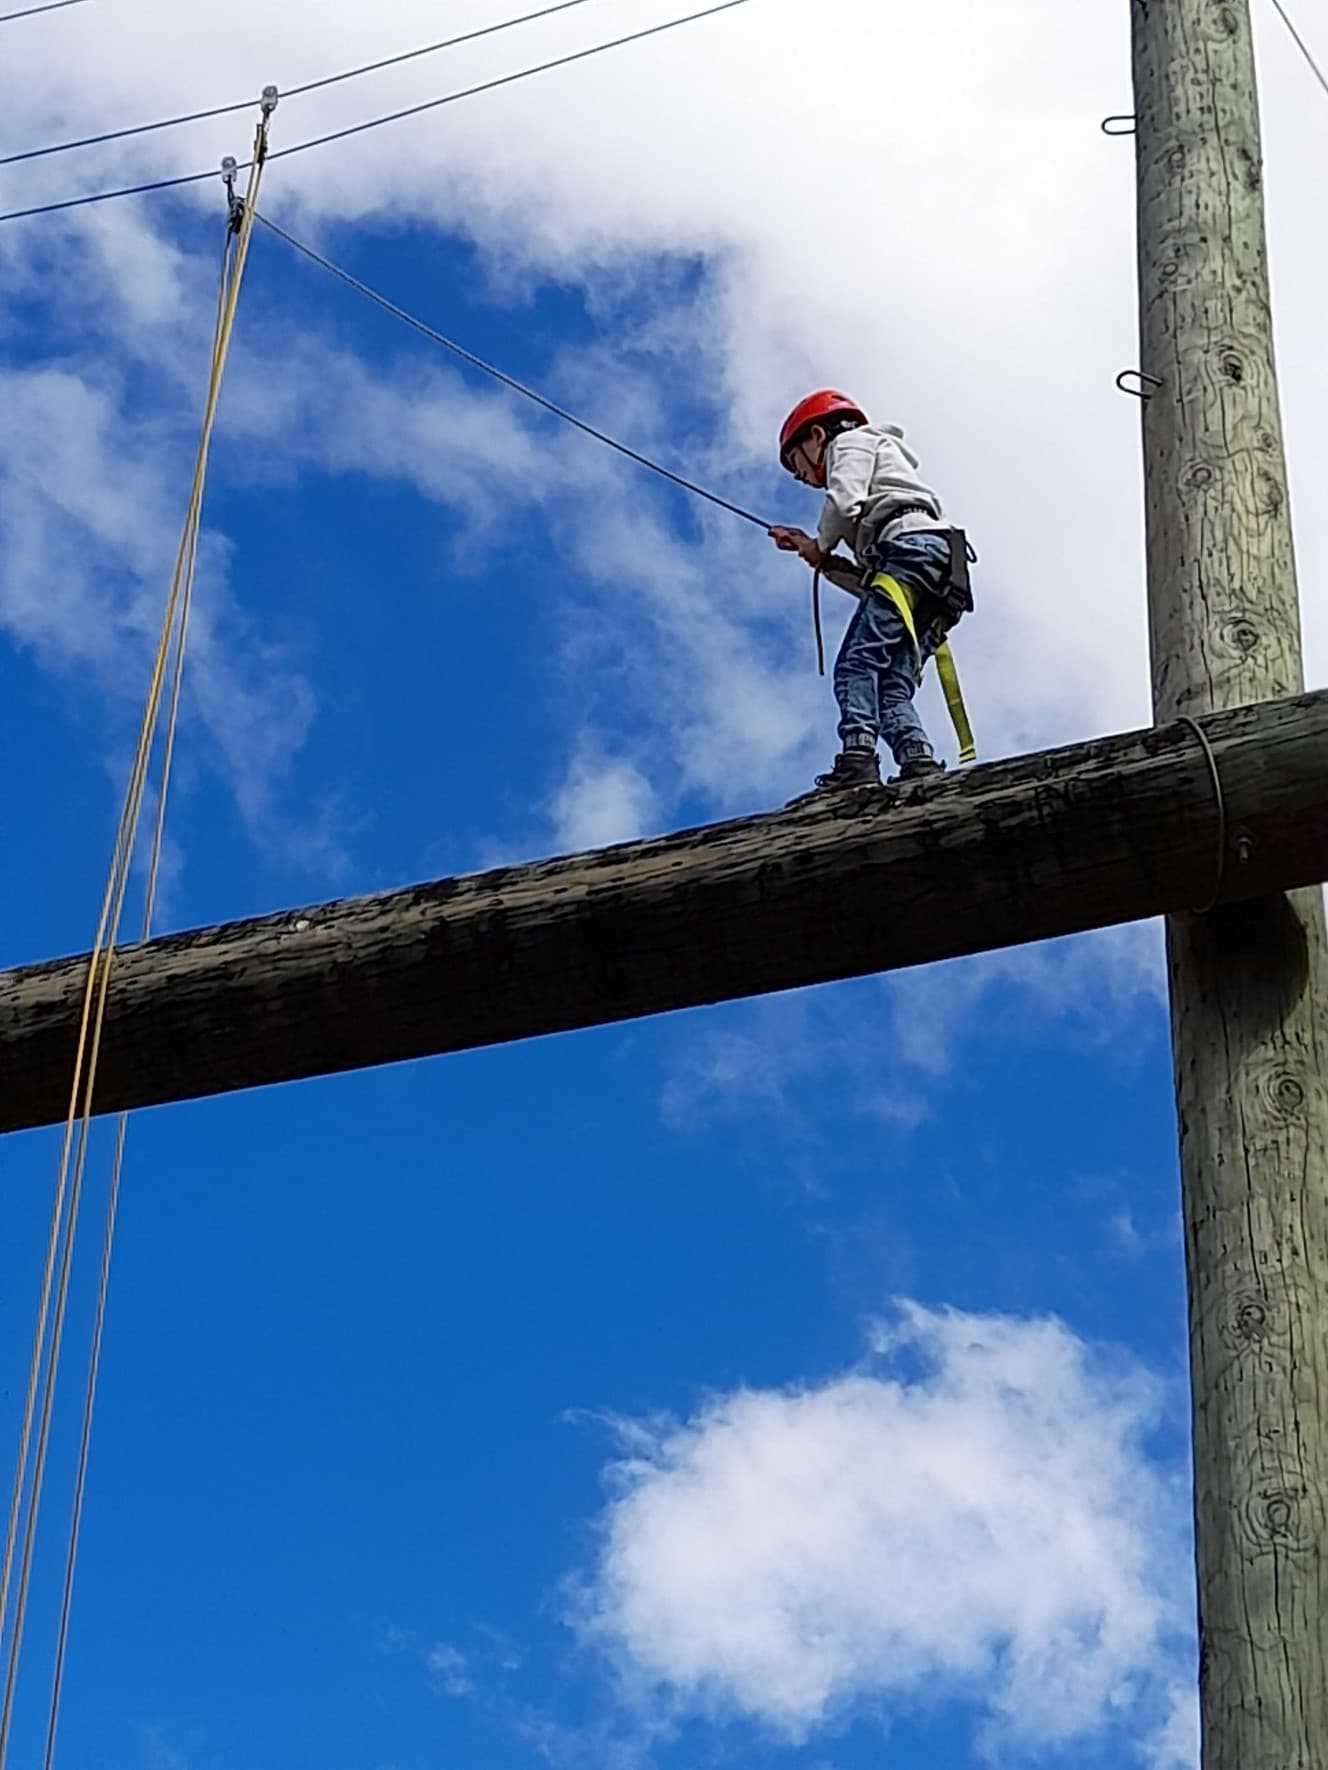 A young member walking along the high ropes beam approximately ten meters above ground, supported by a harness and ropes, with blue sky and white clouds in the background.